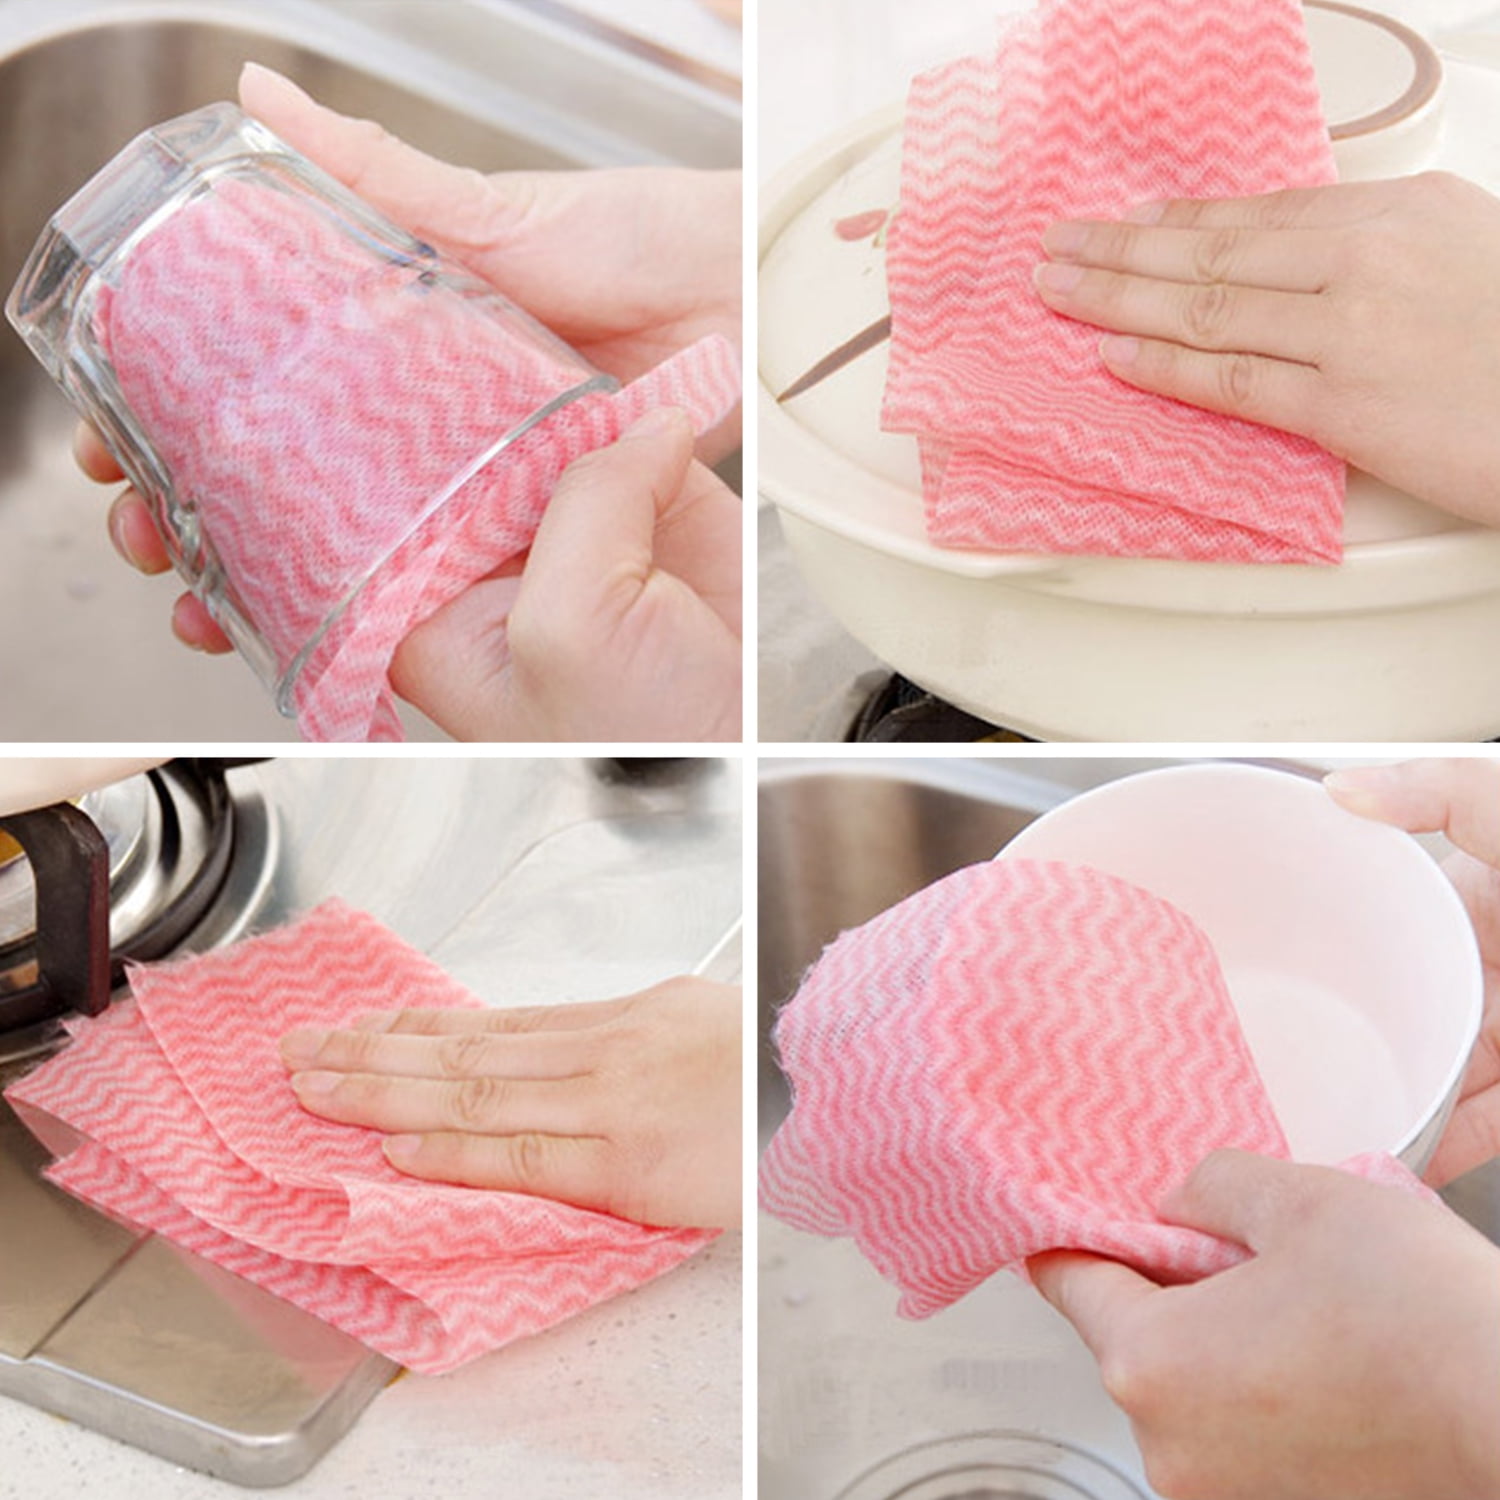 50pcsroll Disposable Dish Cloth Home Cleaning Towels Kitchen Housework Dish Cleaning Cloths Wiping Pad Absorbent Dry Quickly Dishcloth Bathroom